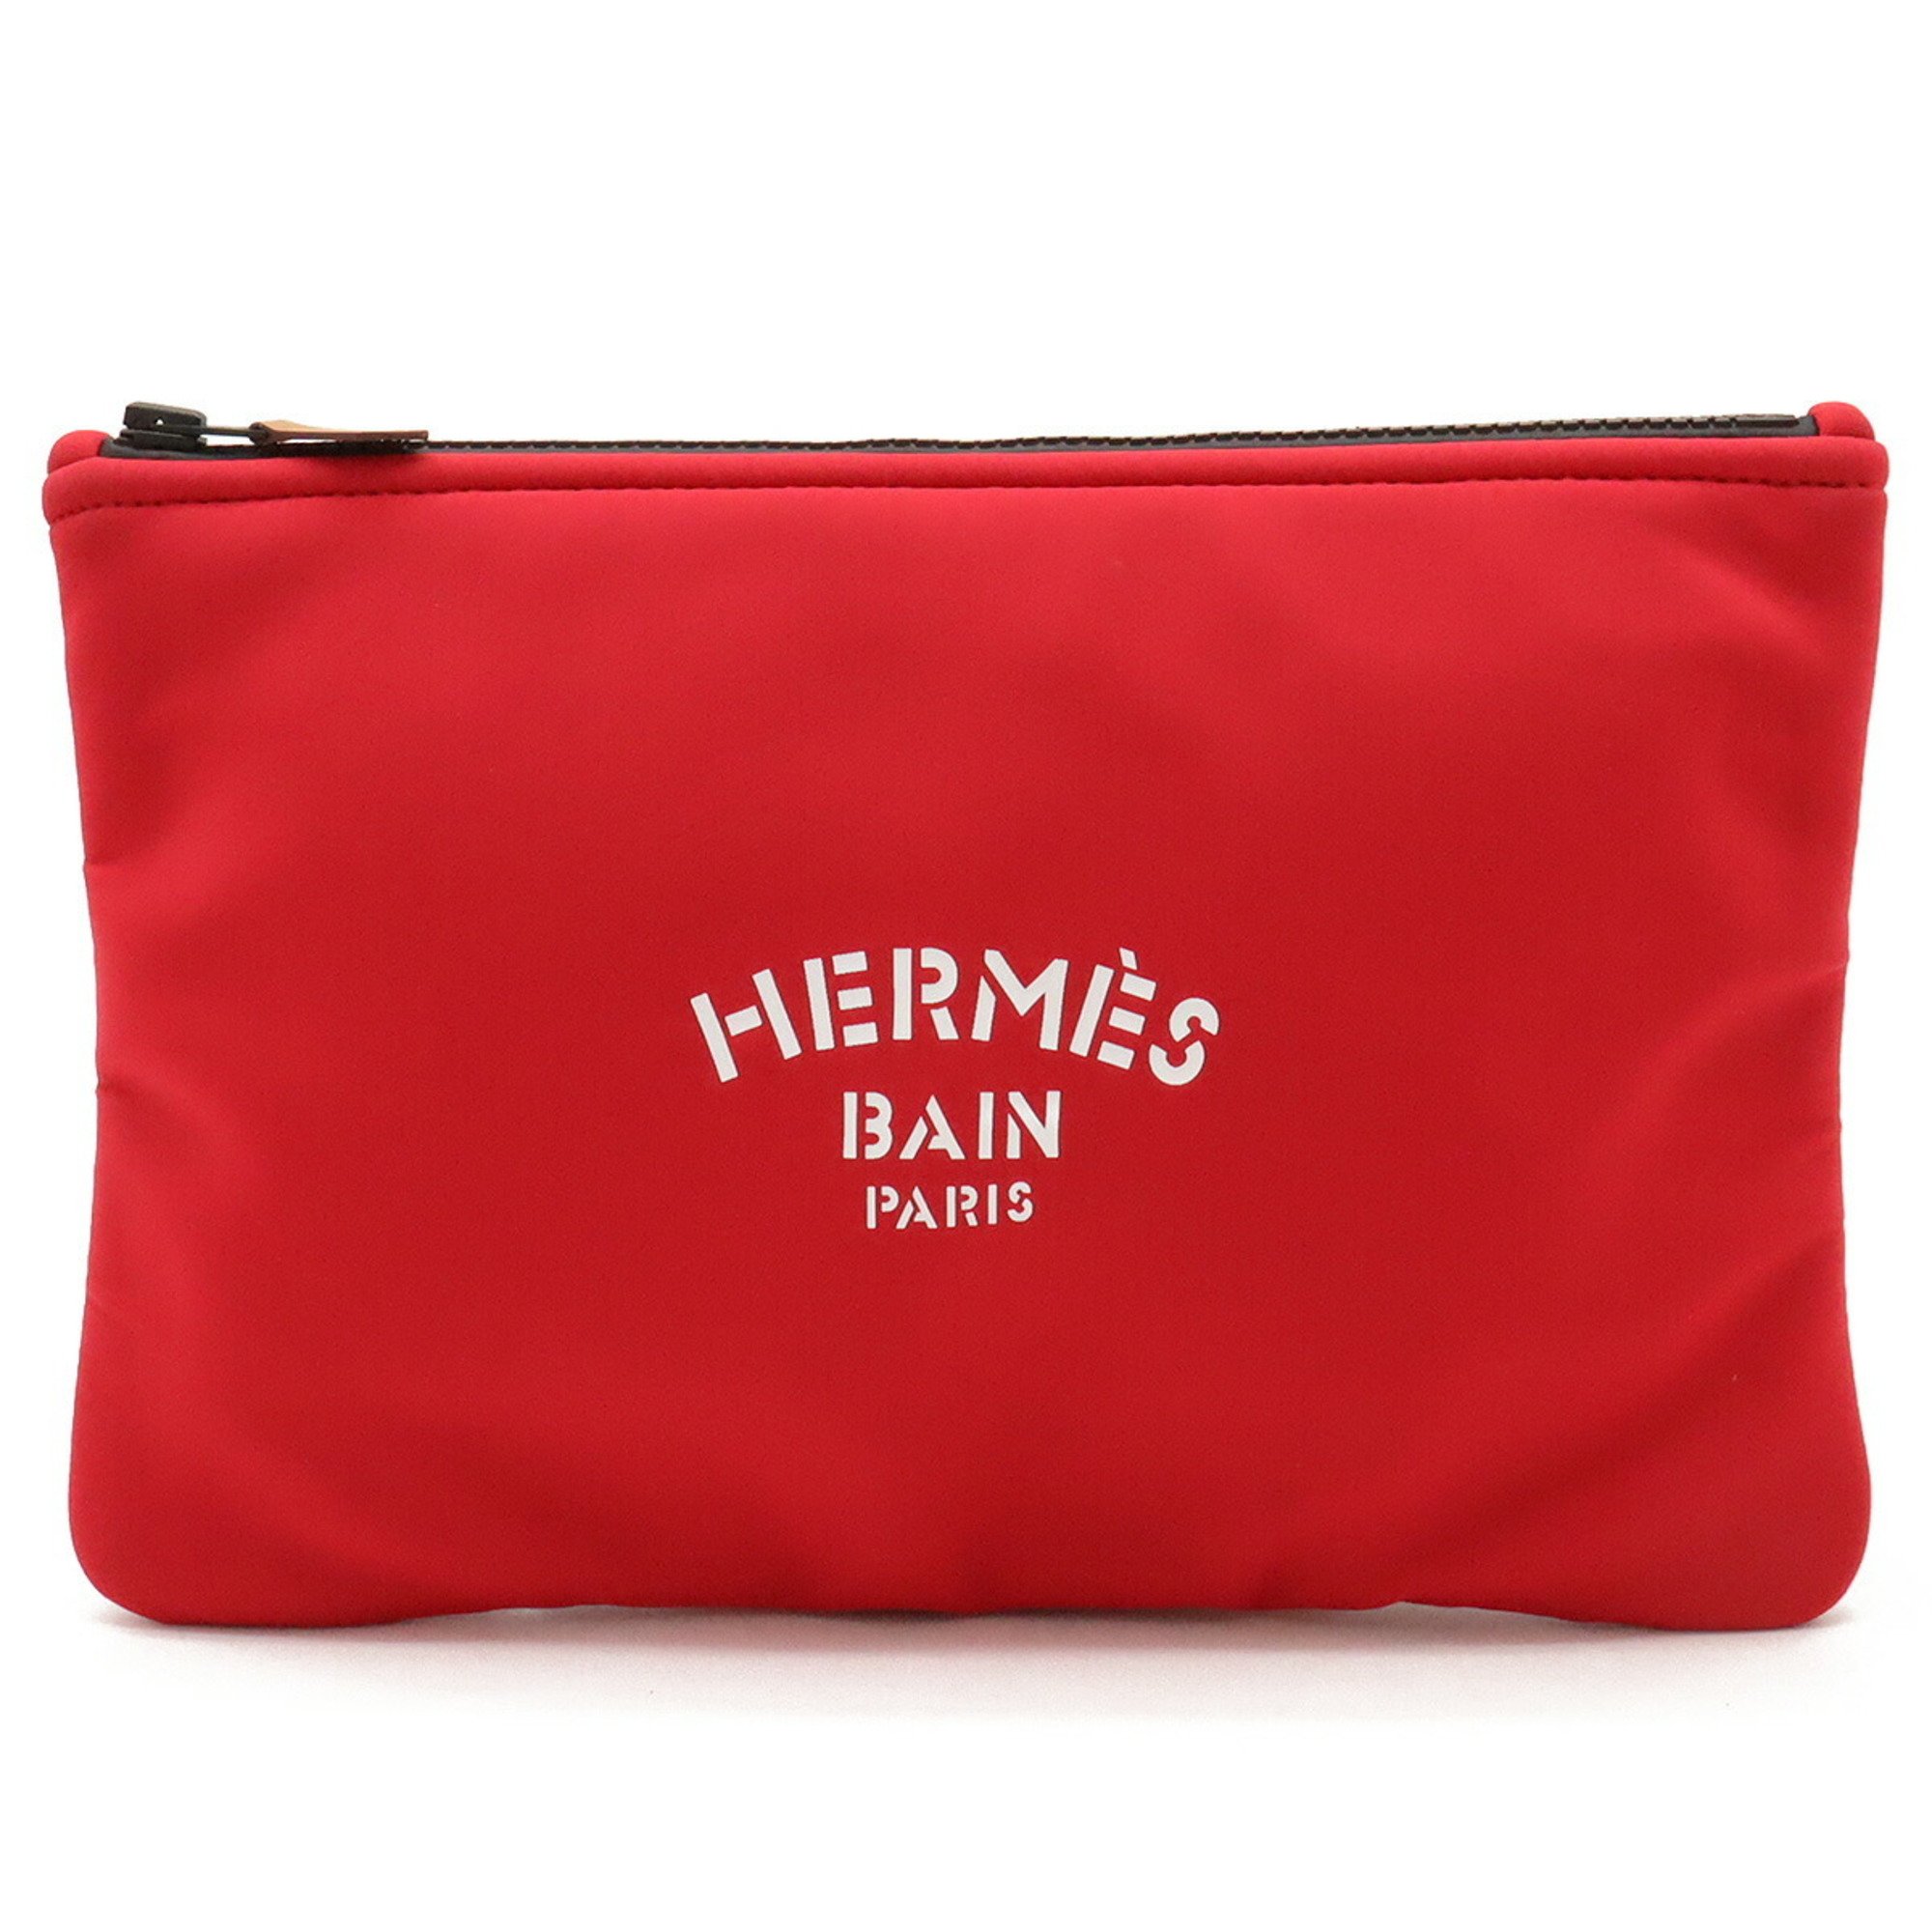 HERMES Hermes Truss Flat MM Neoban Multi Pouch Clutch Bag Second Polyamide Elastane Leather Red